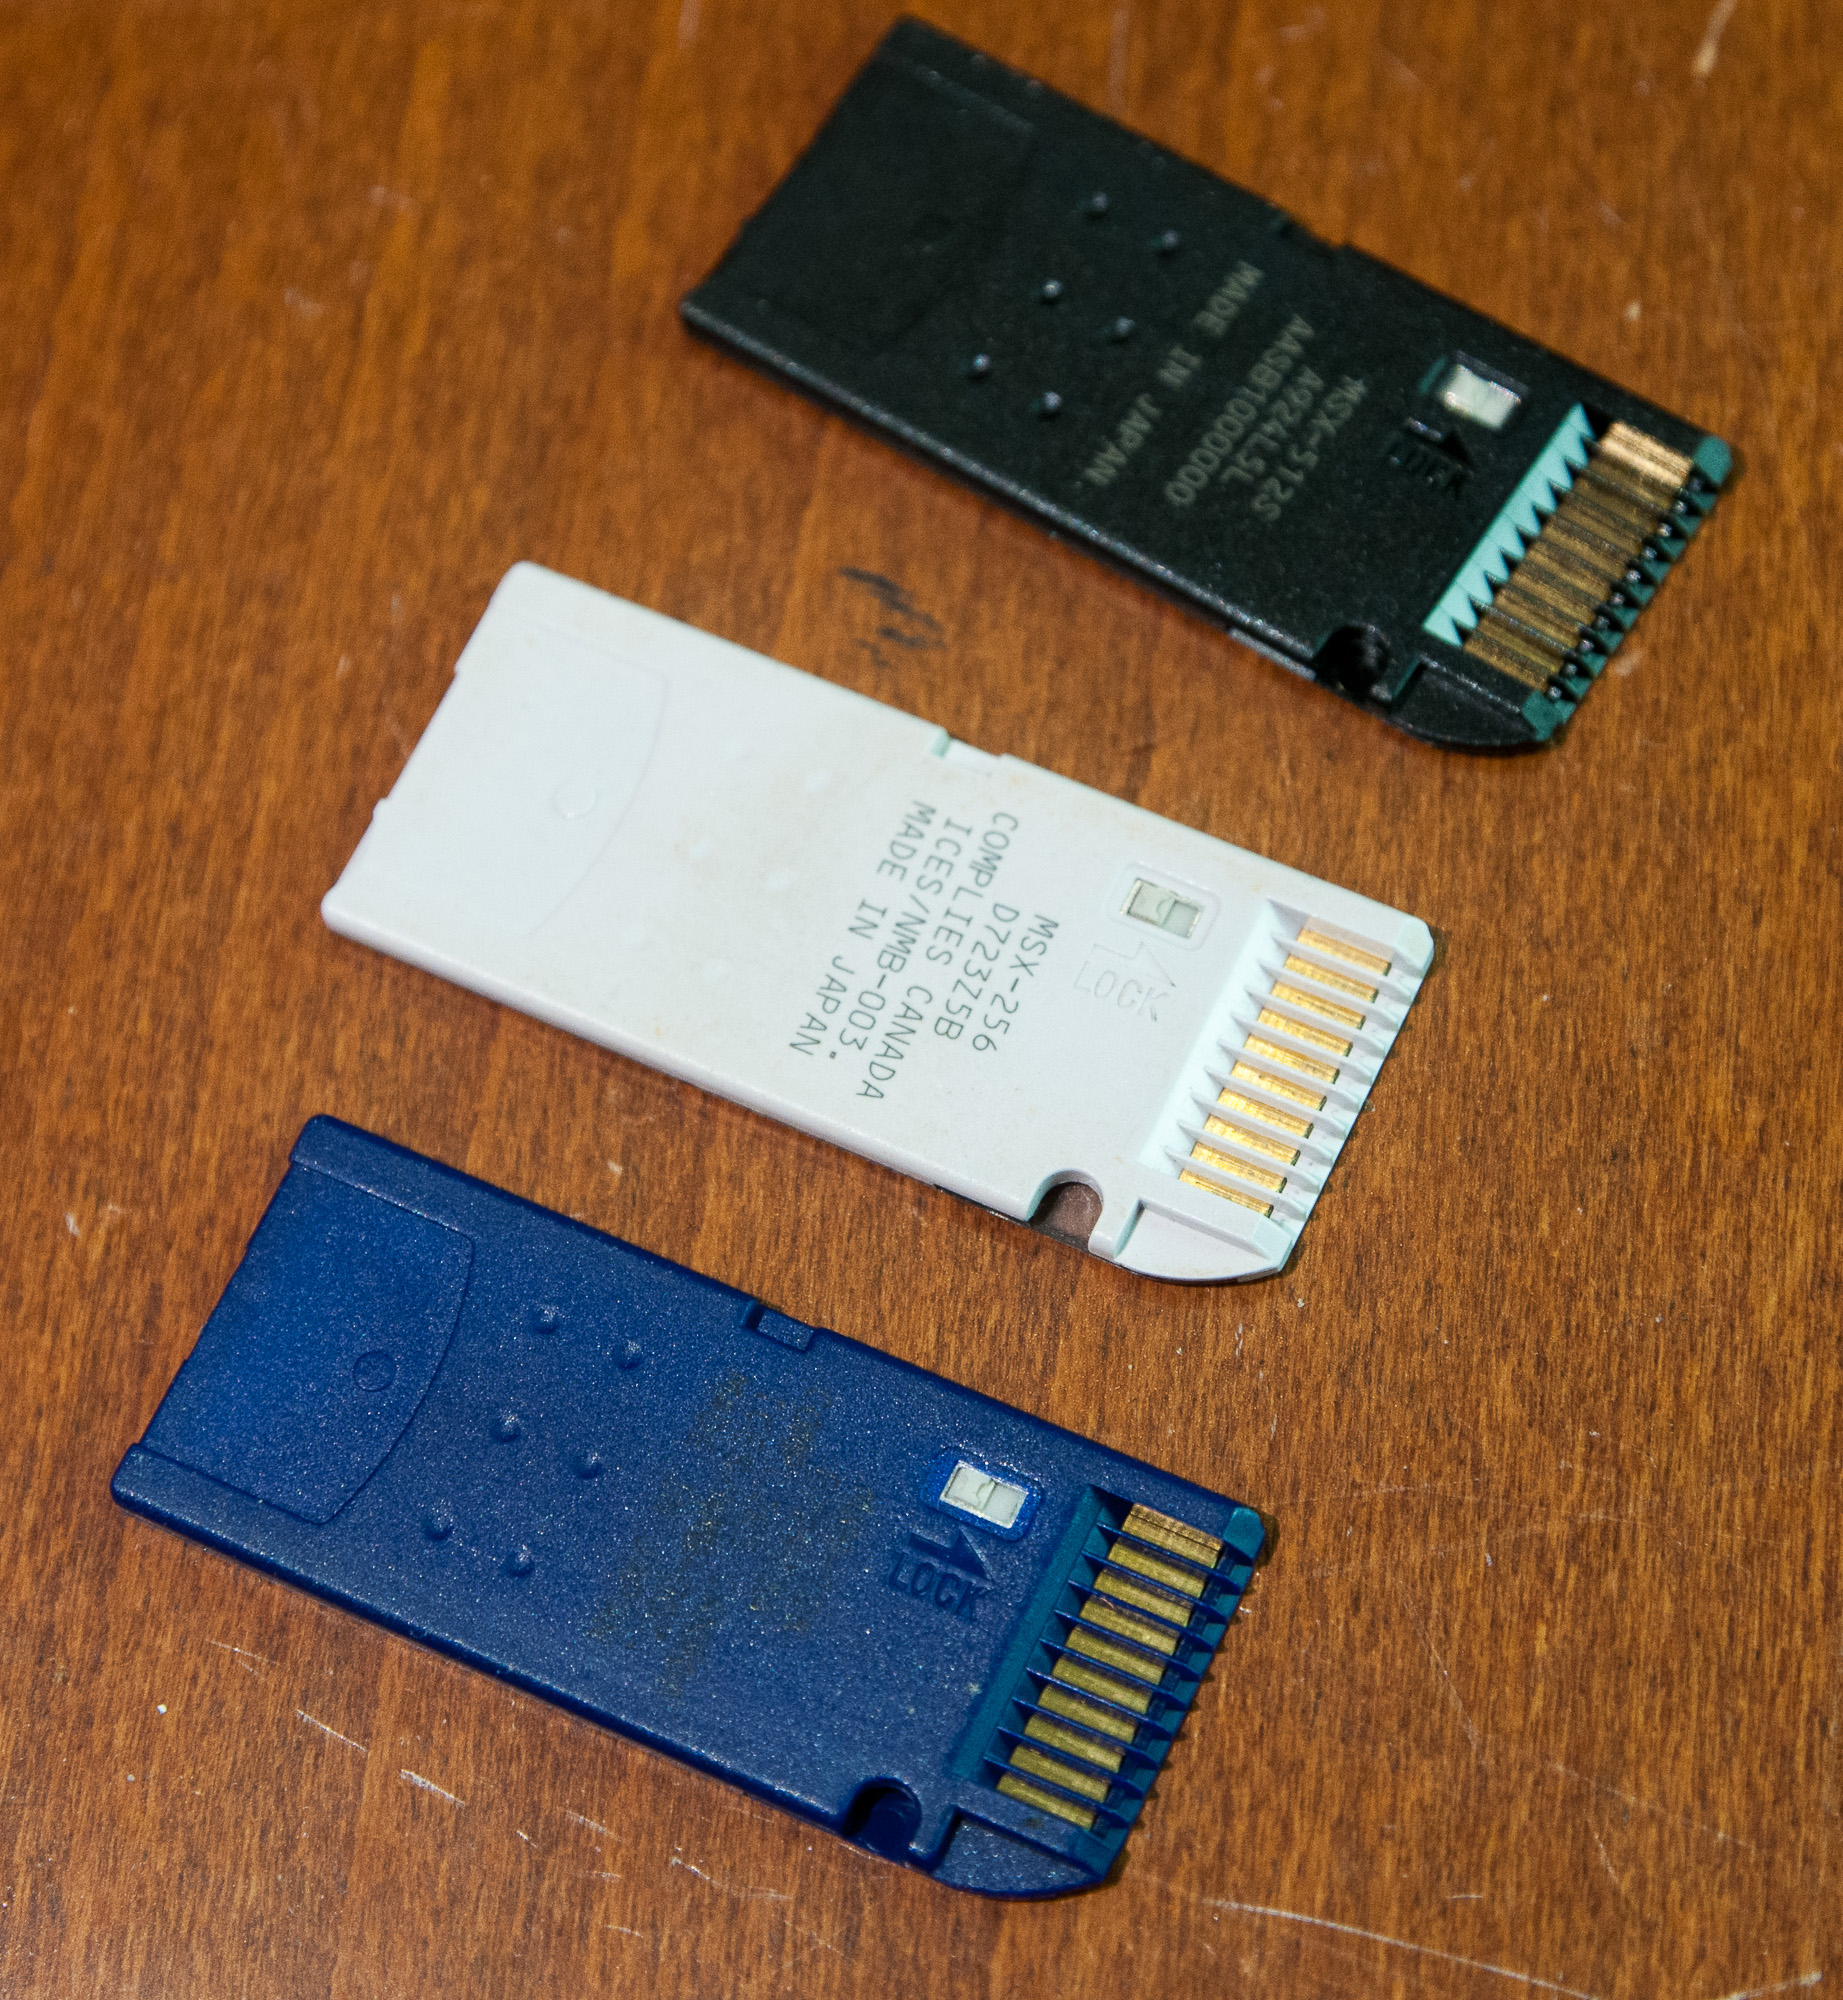 what is ricoh memory stick device